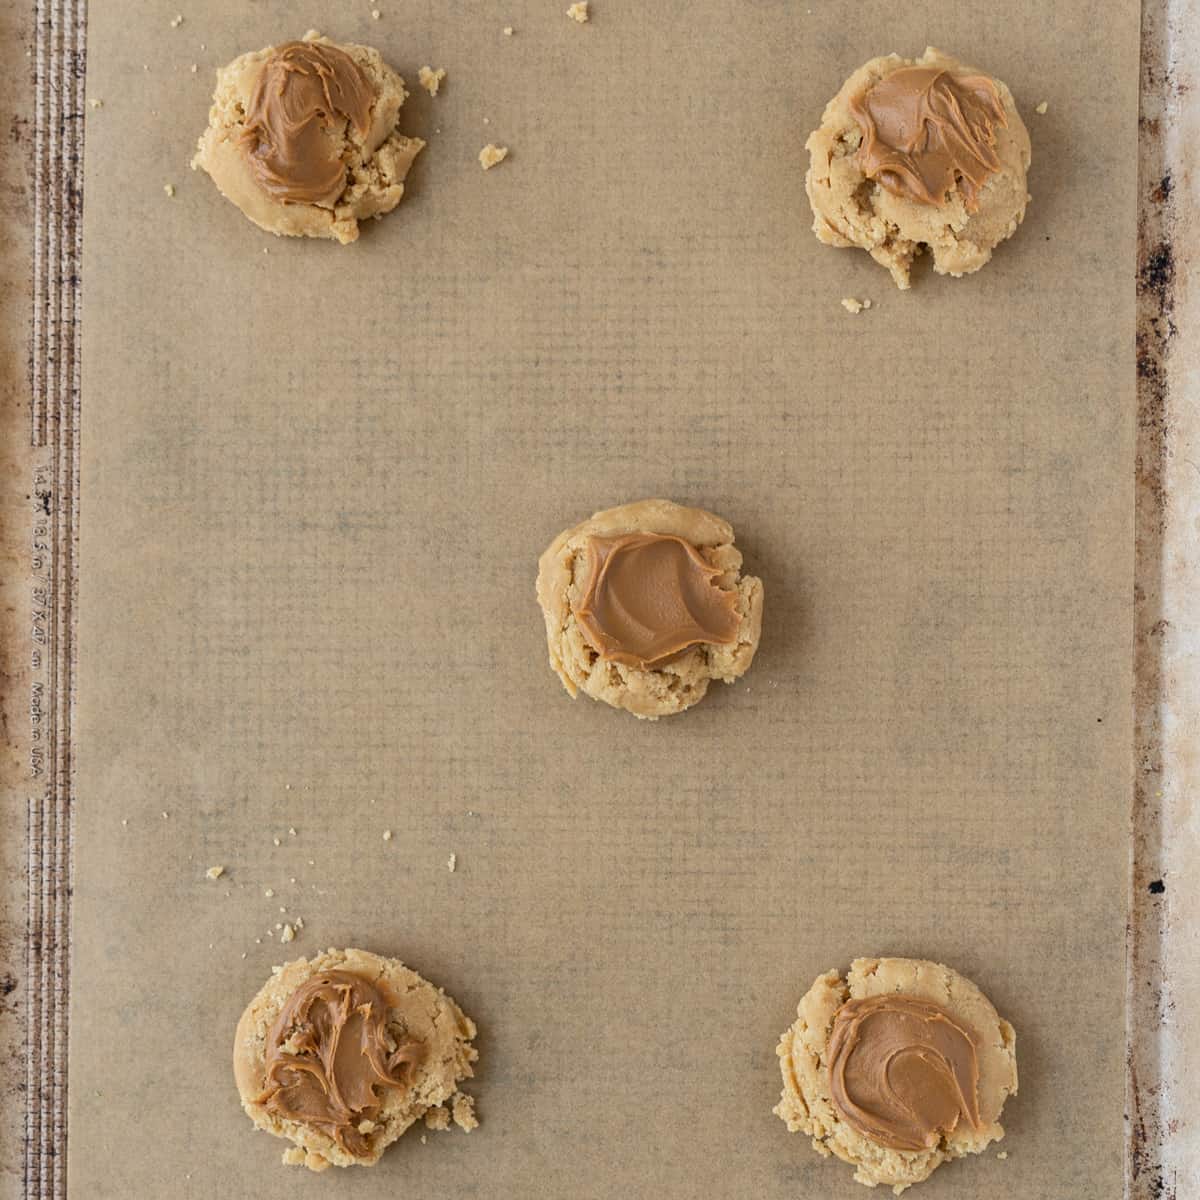 the unbaked cookie dough swirled with biscoff butter on a prepared cookie sheet